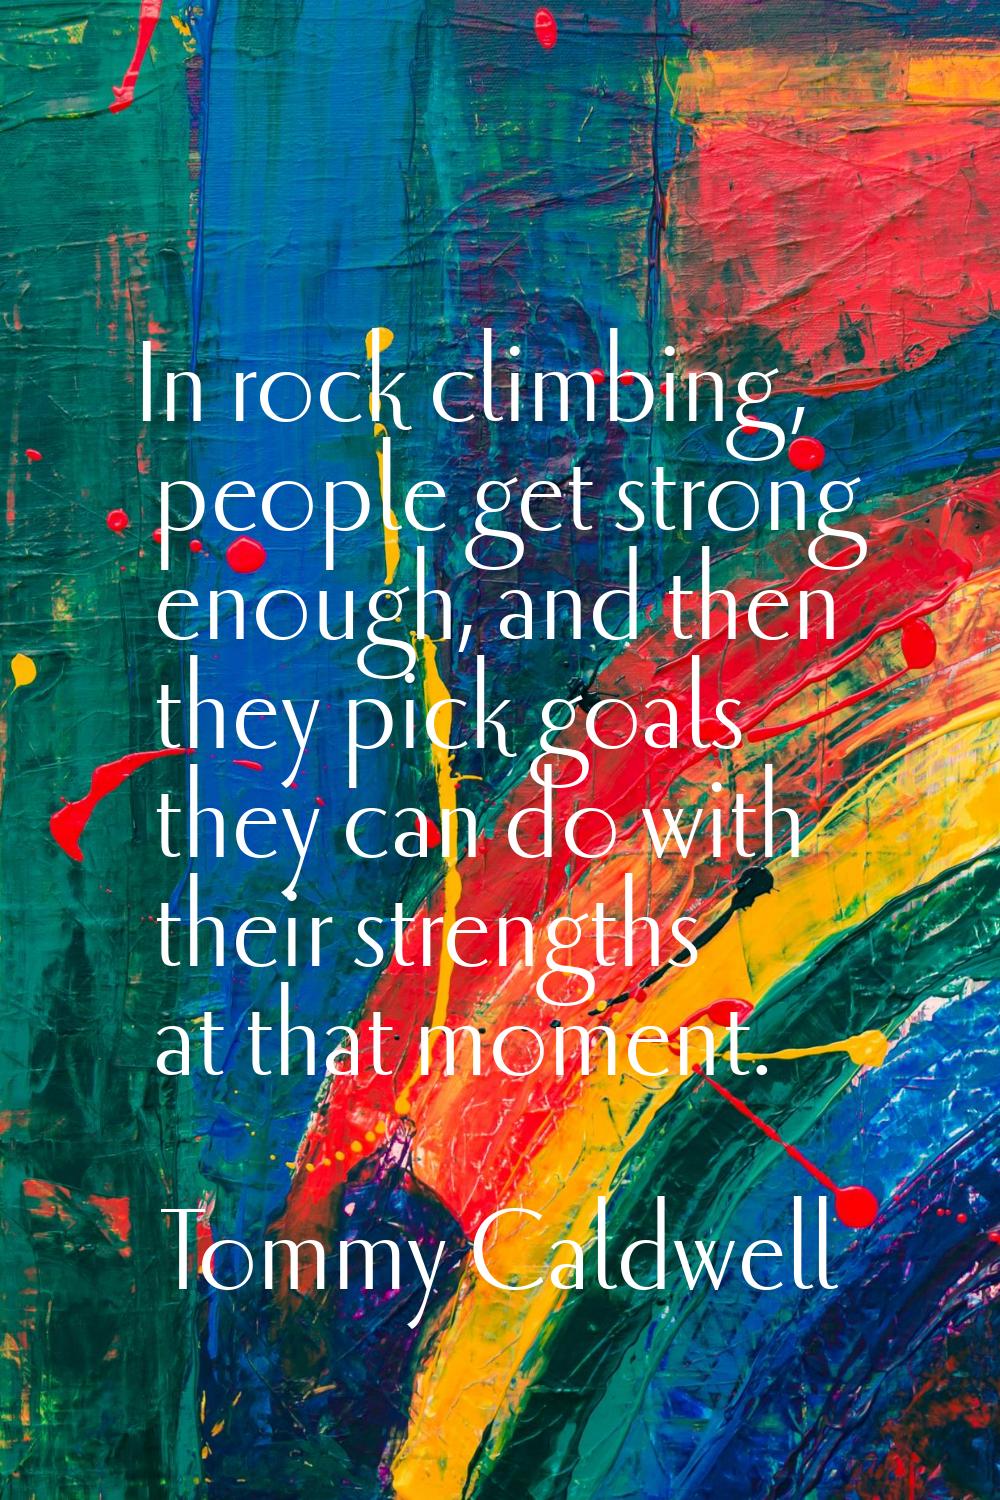 In rock climbing, people get strong enough, and then they pick goals they can do with their strengt